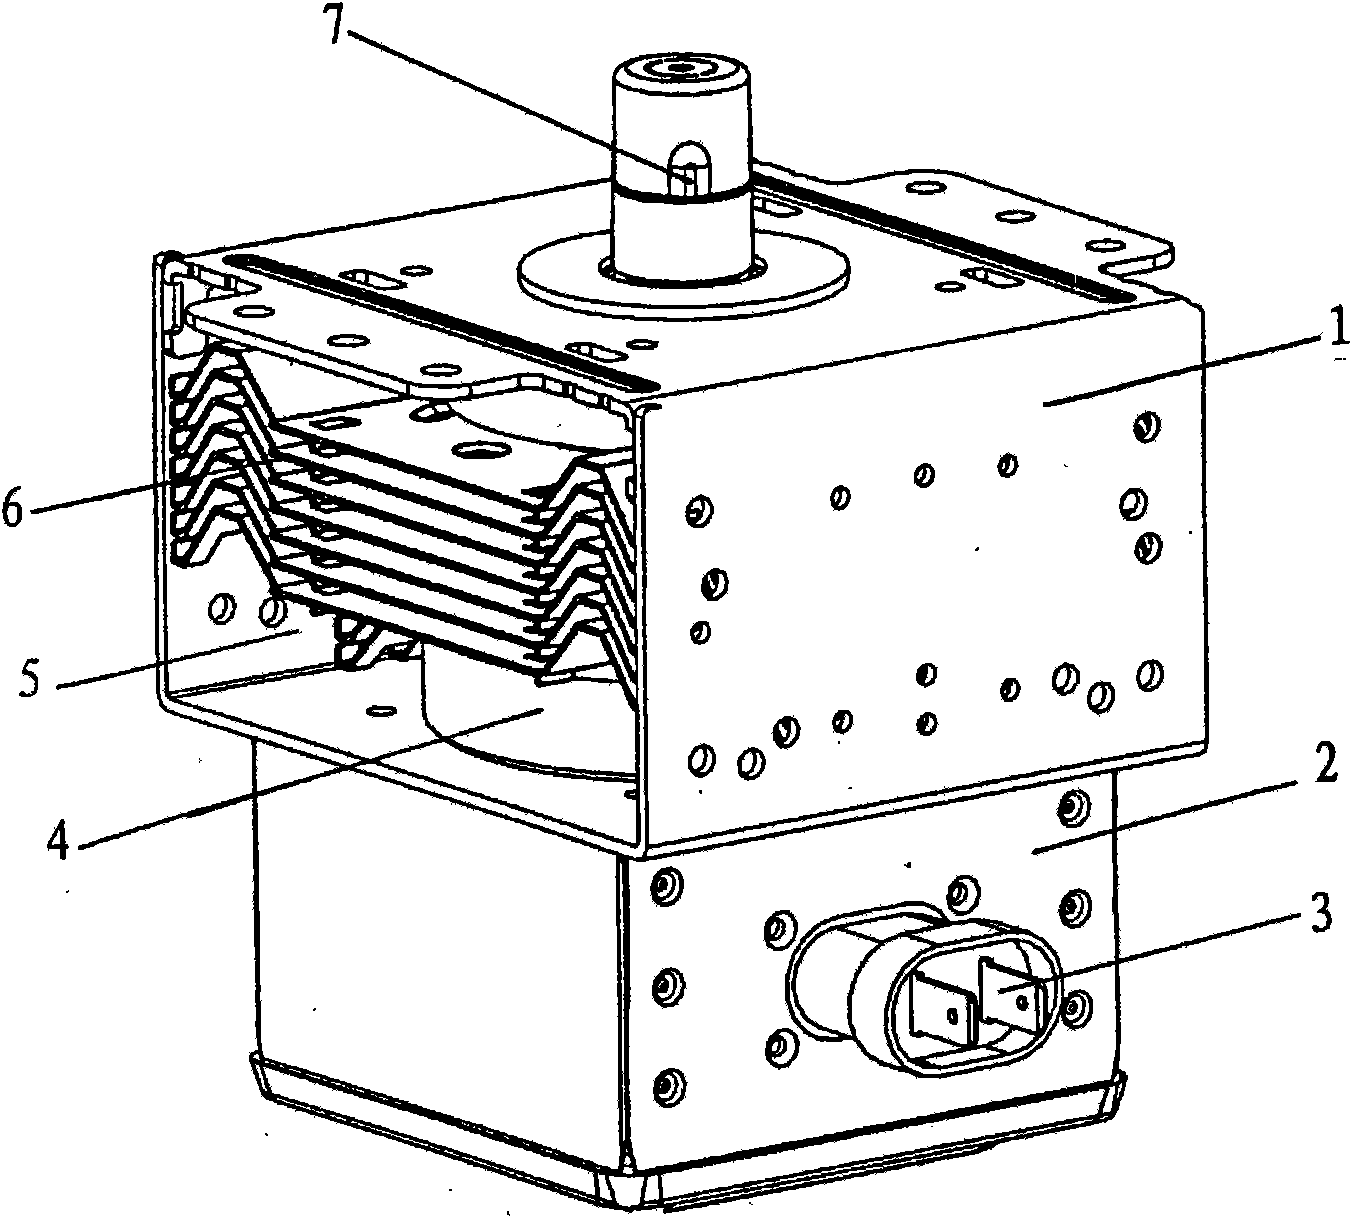 Water cooling structure of microwave oven magnetron